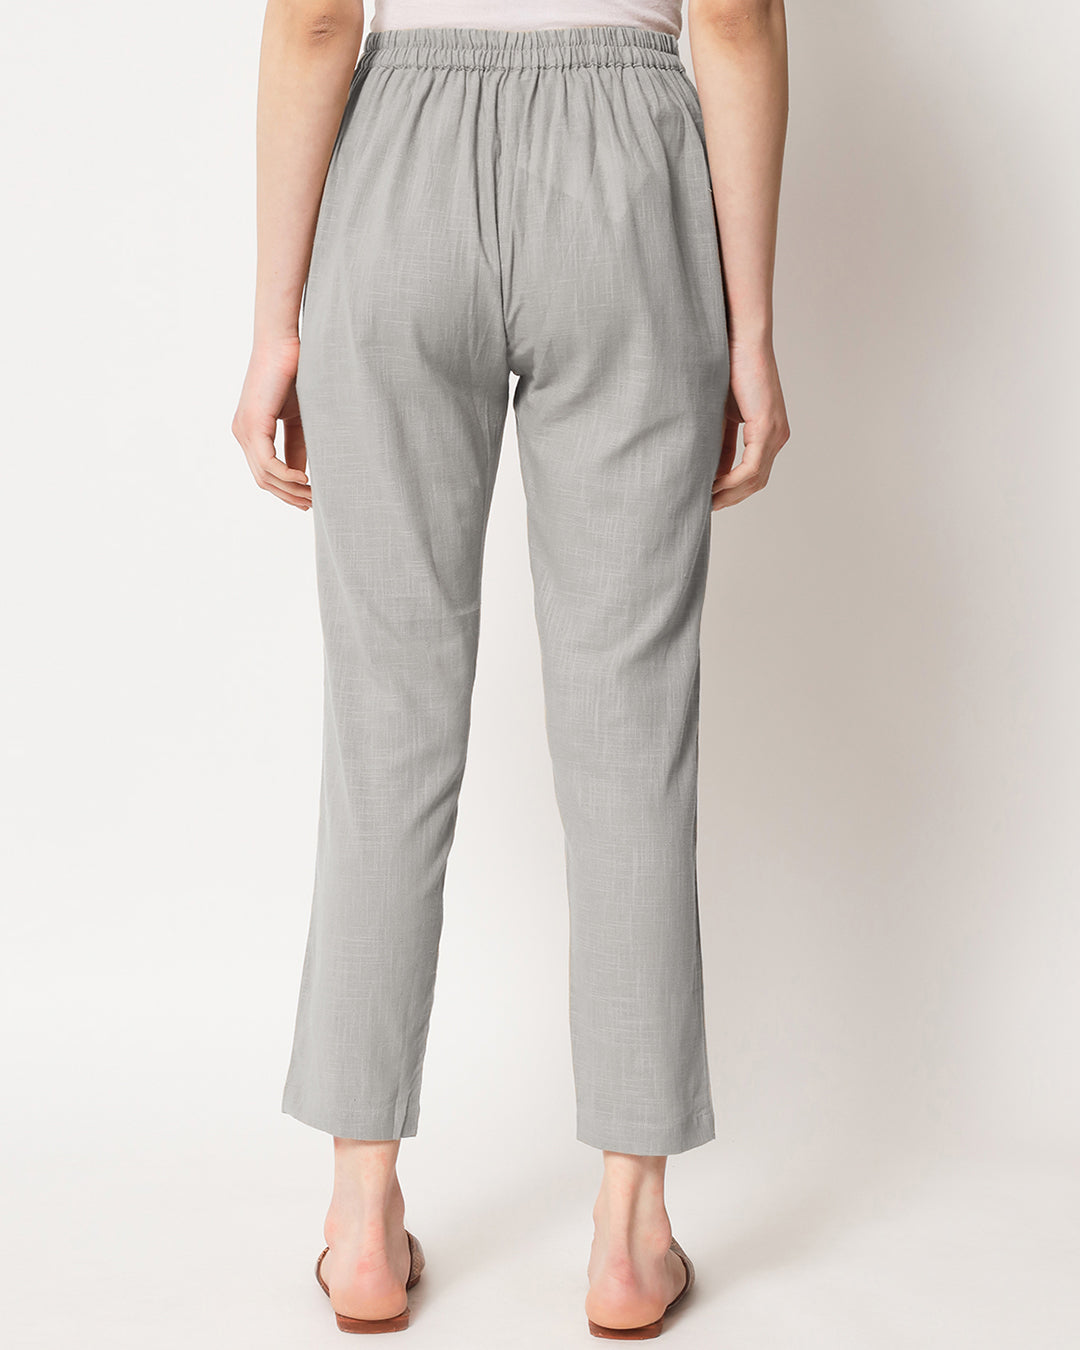 Iced Grey Cigarette Pants